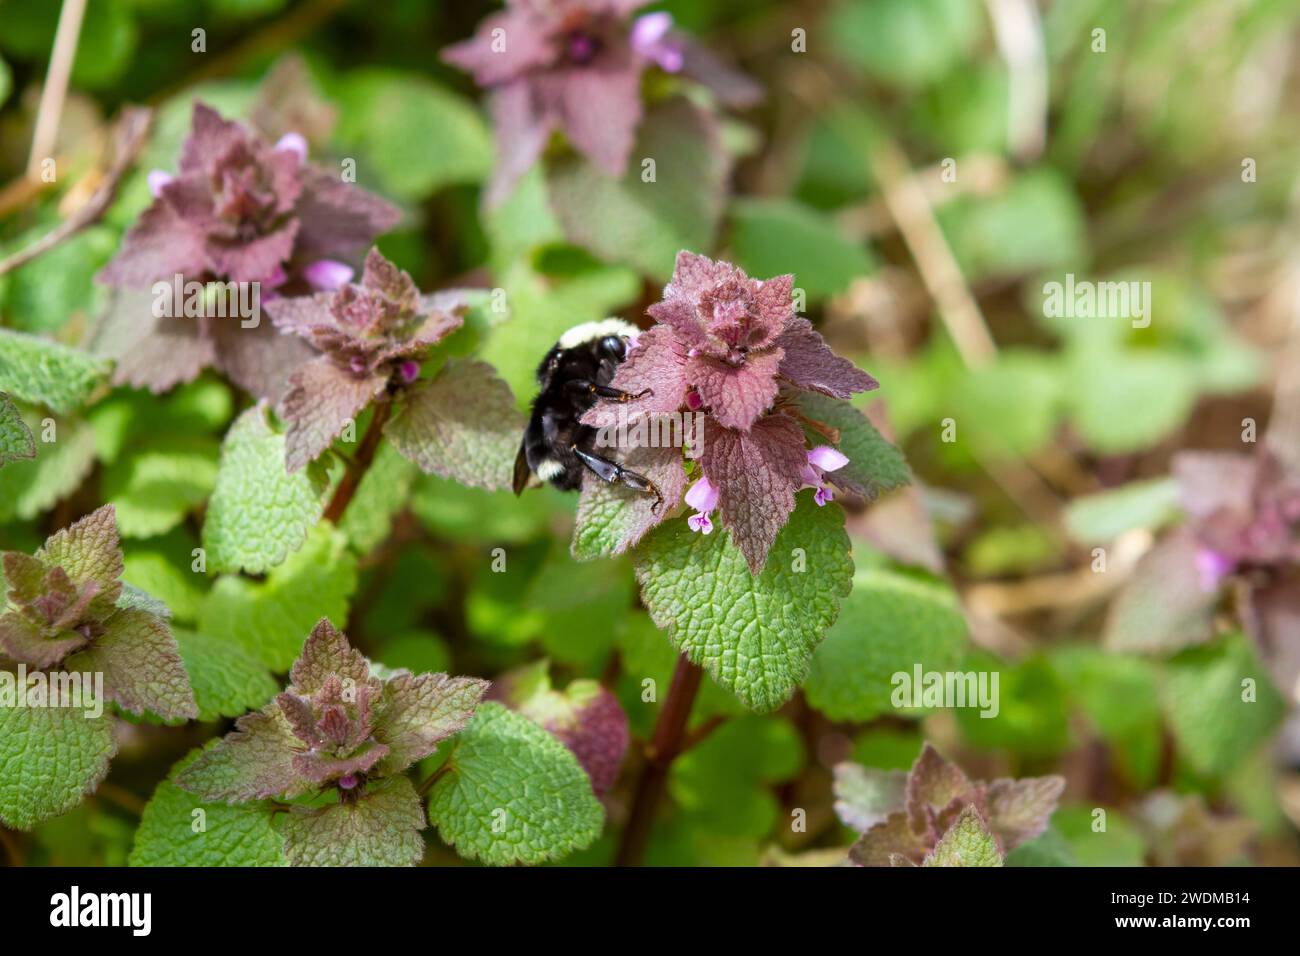 Purple Dead Nettle (Lamium purpureum), an early blooming weed that is easily foraged, edible, medicinal, and an important food source for pollinators. Stock Photo